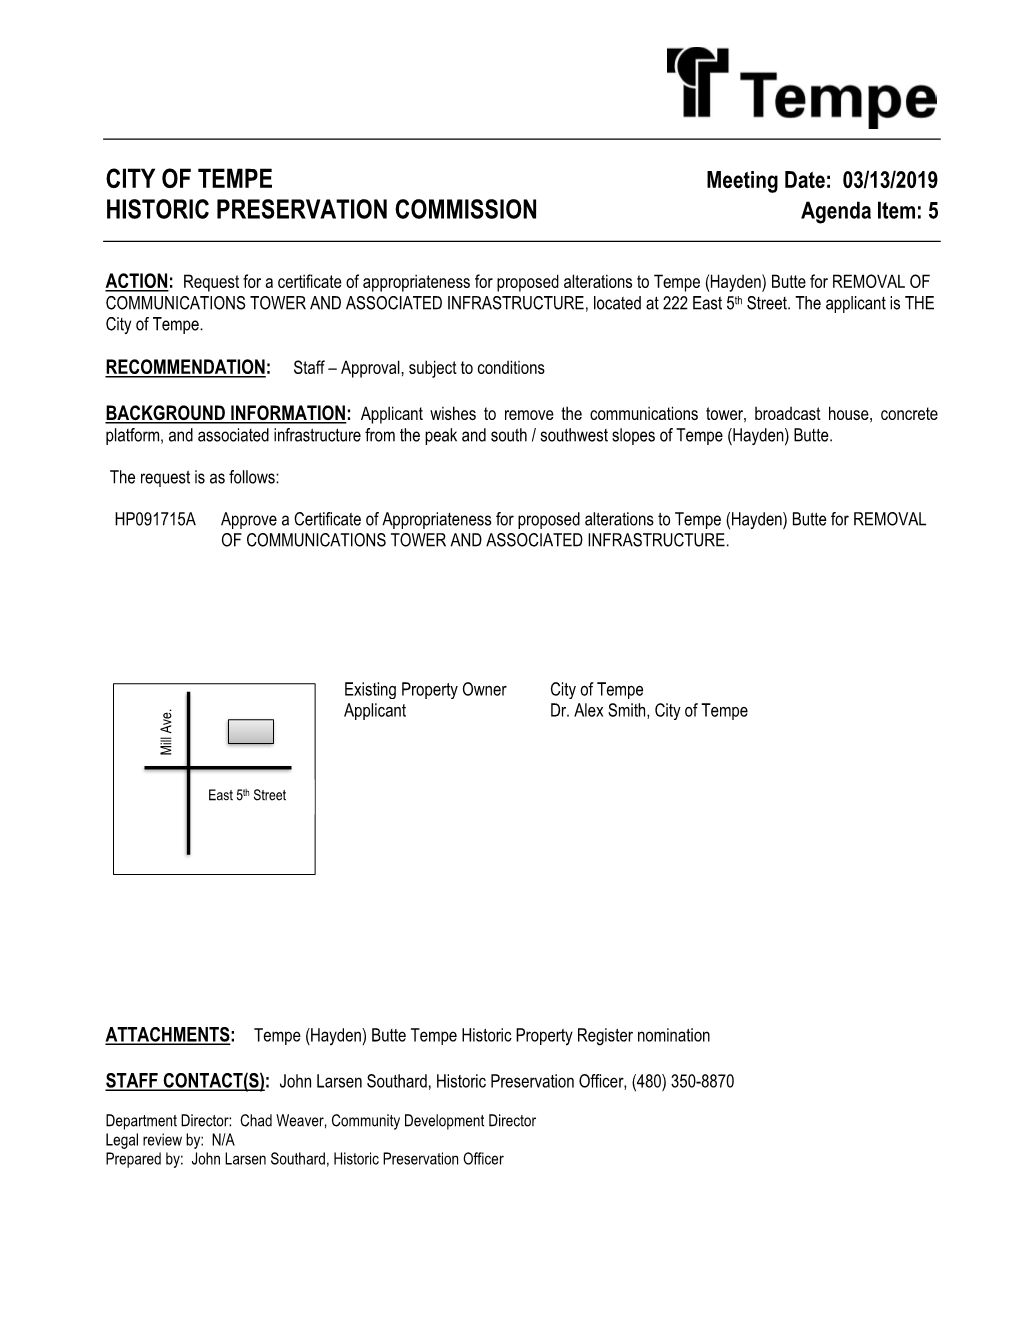 City of Tempe Historic Preservation Commission